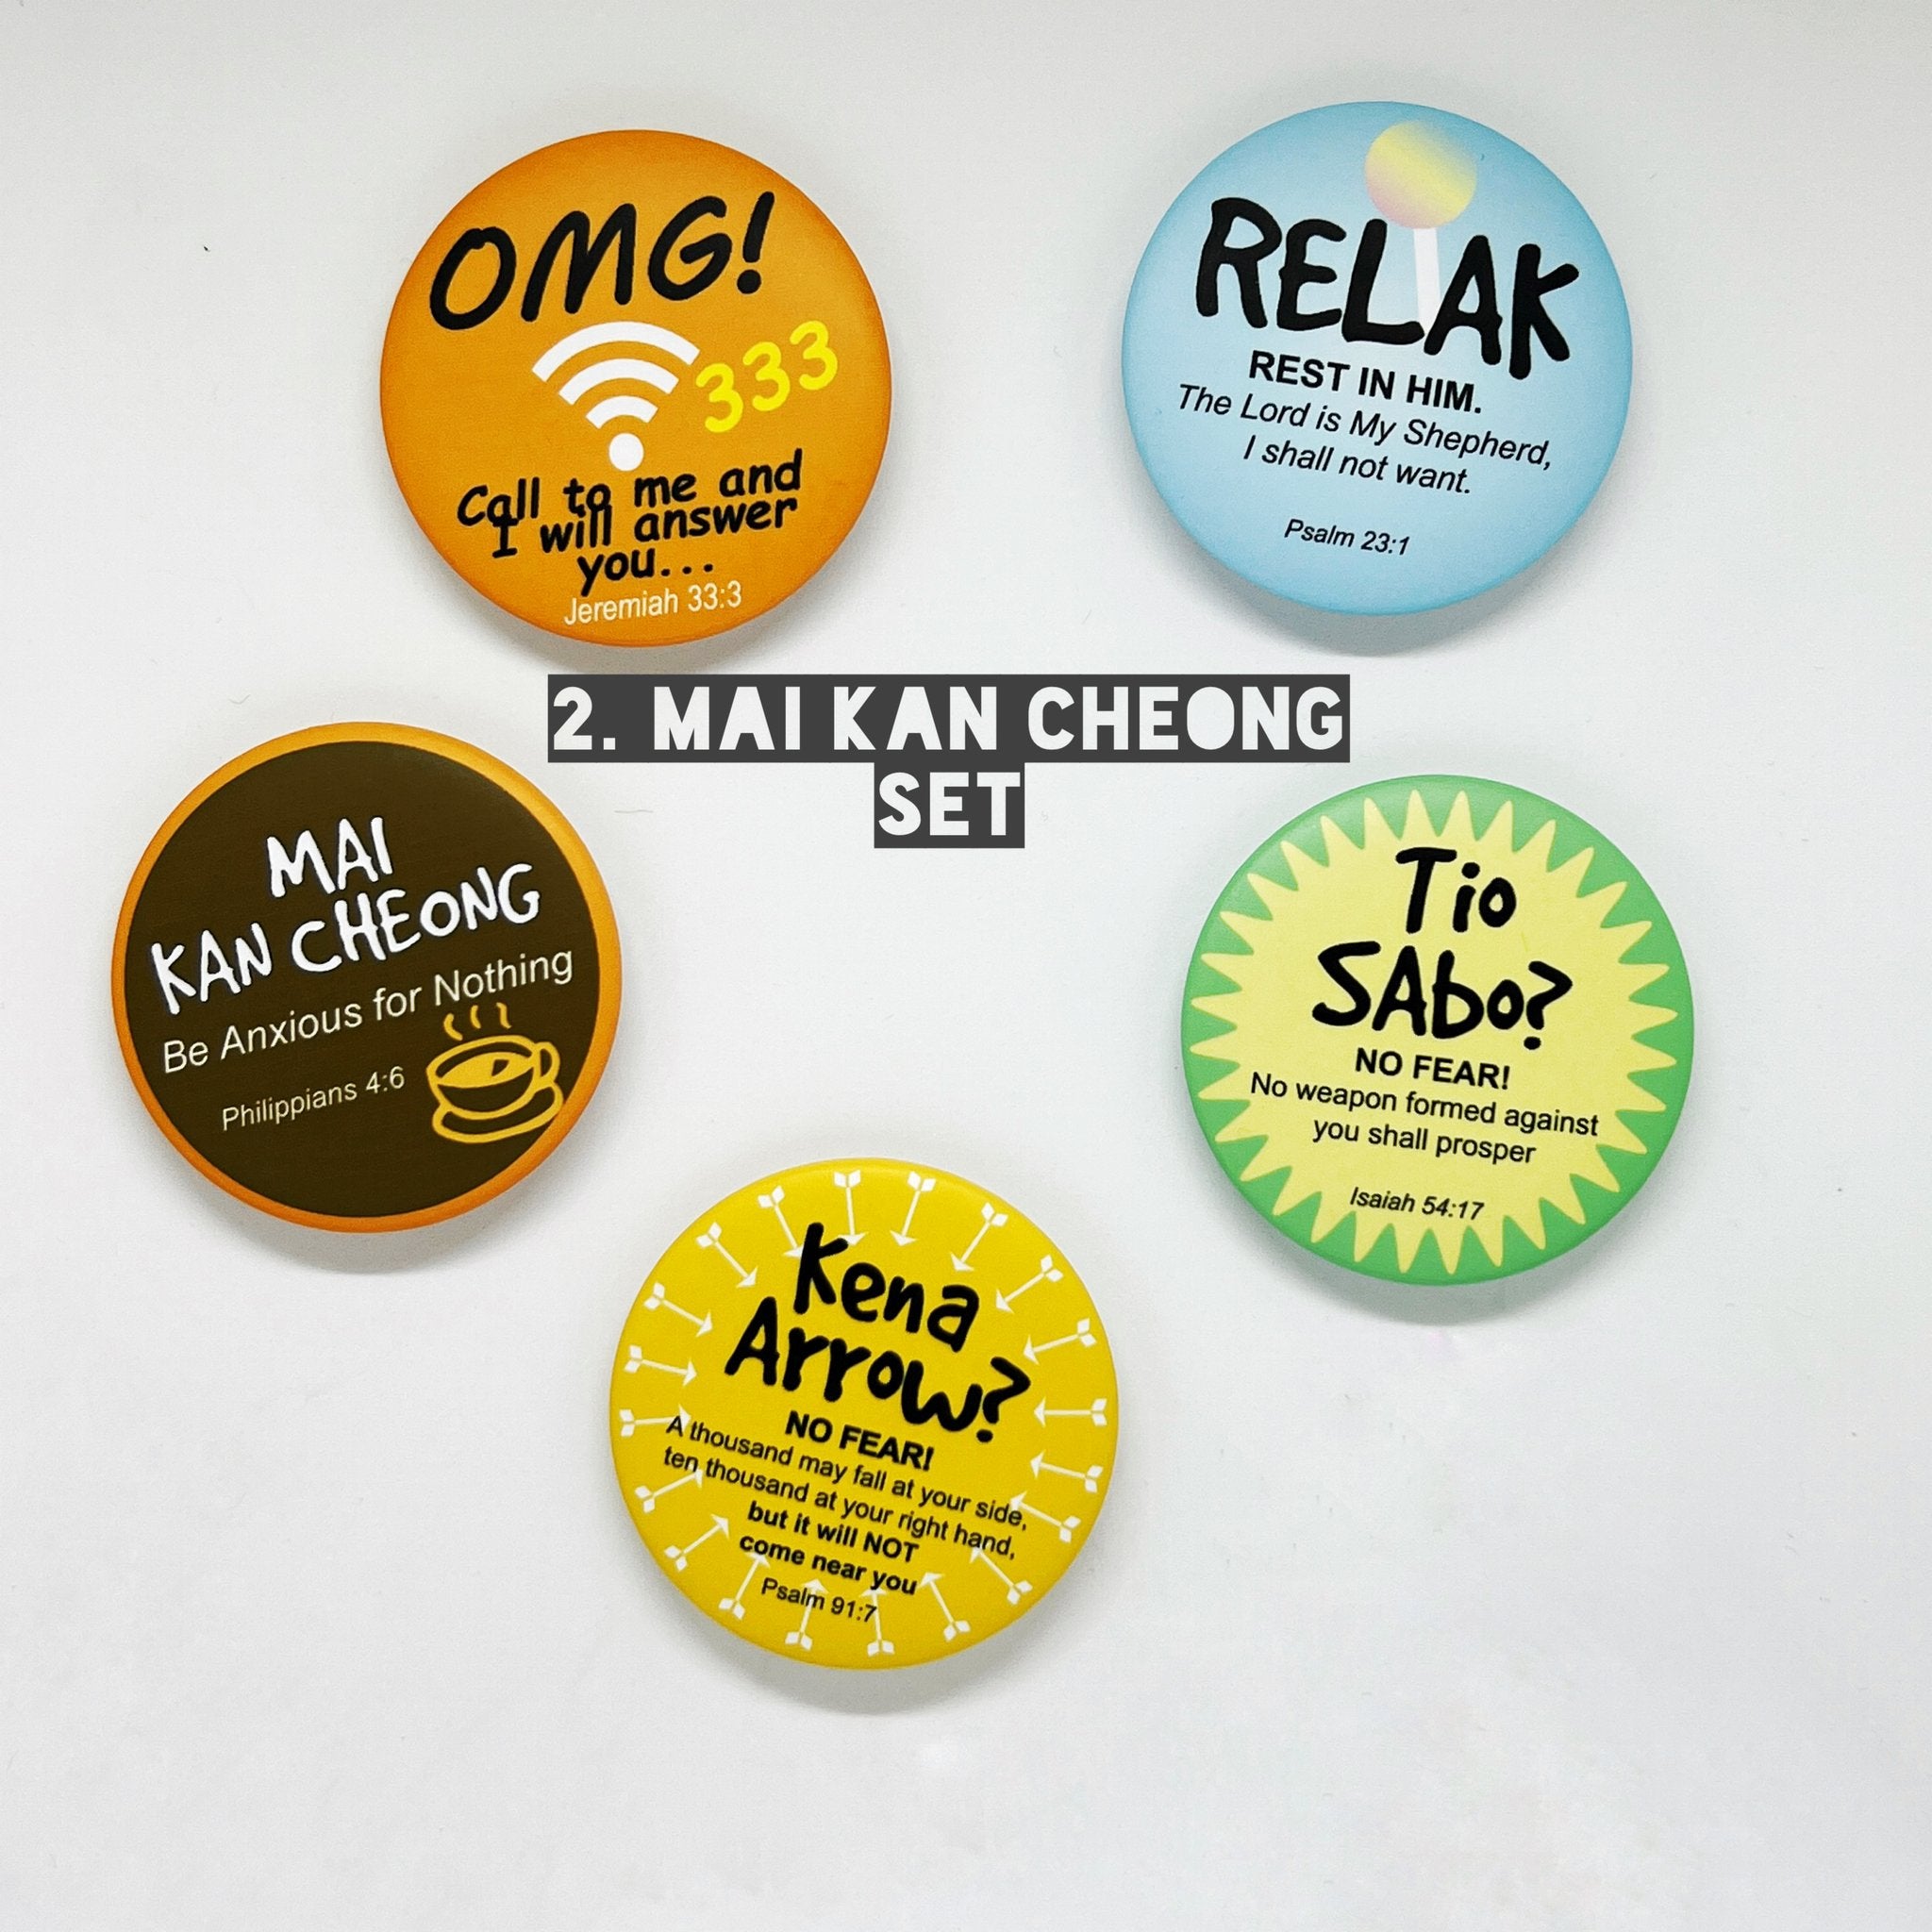 ROCKONLINE |Set of 5 Badges “I’m a Singaporean Christian lah!" by The Super Blessed | Accessories | Fashion | Apparel | Youth | Teen | Boys | Girls | Christian Gifts | The Super Blessed | Rock Bookshop | Rock Bookstore | Star Vista | New Creation Church | Joseph Prince | Free Delivery for Singapore Orders above $50.